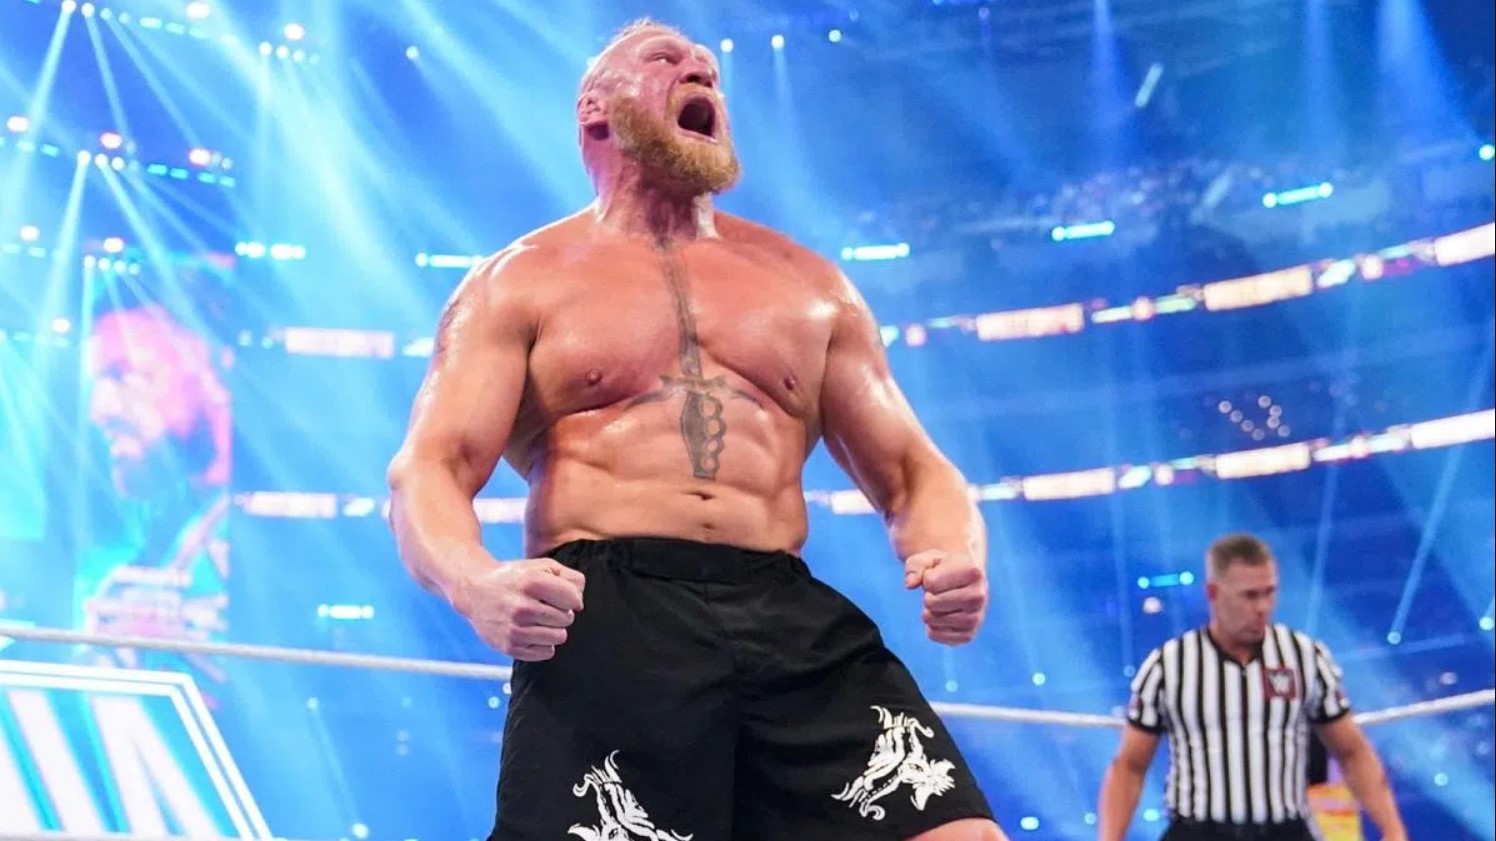 Report: Brock Lesnar was Set to Face Dominik at Elimination Chamber